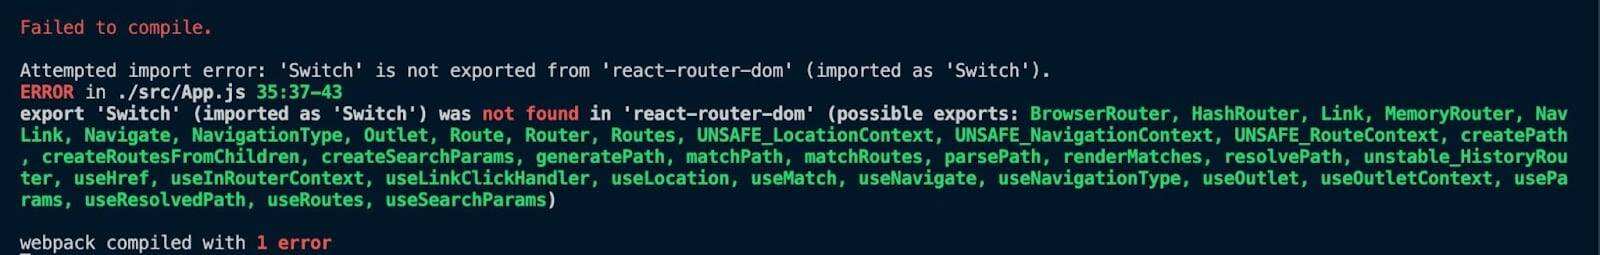 'Switch' is not exported from 'react-router-dom' 错误截图